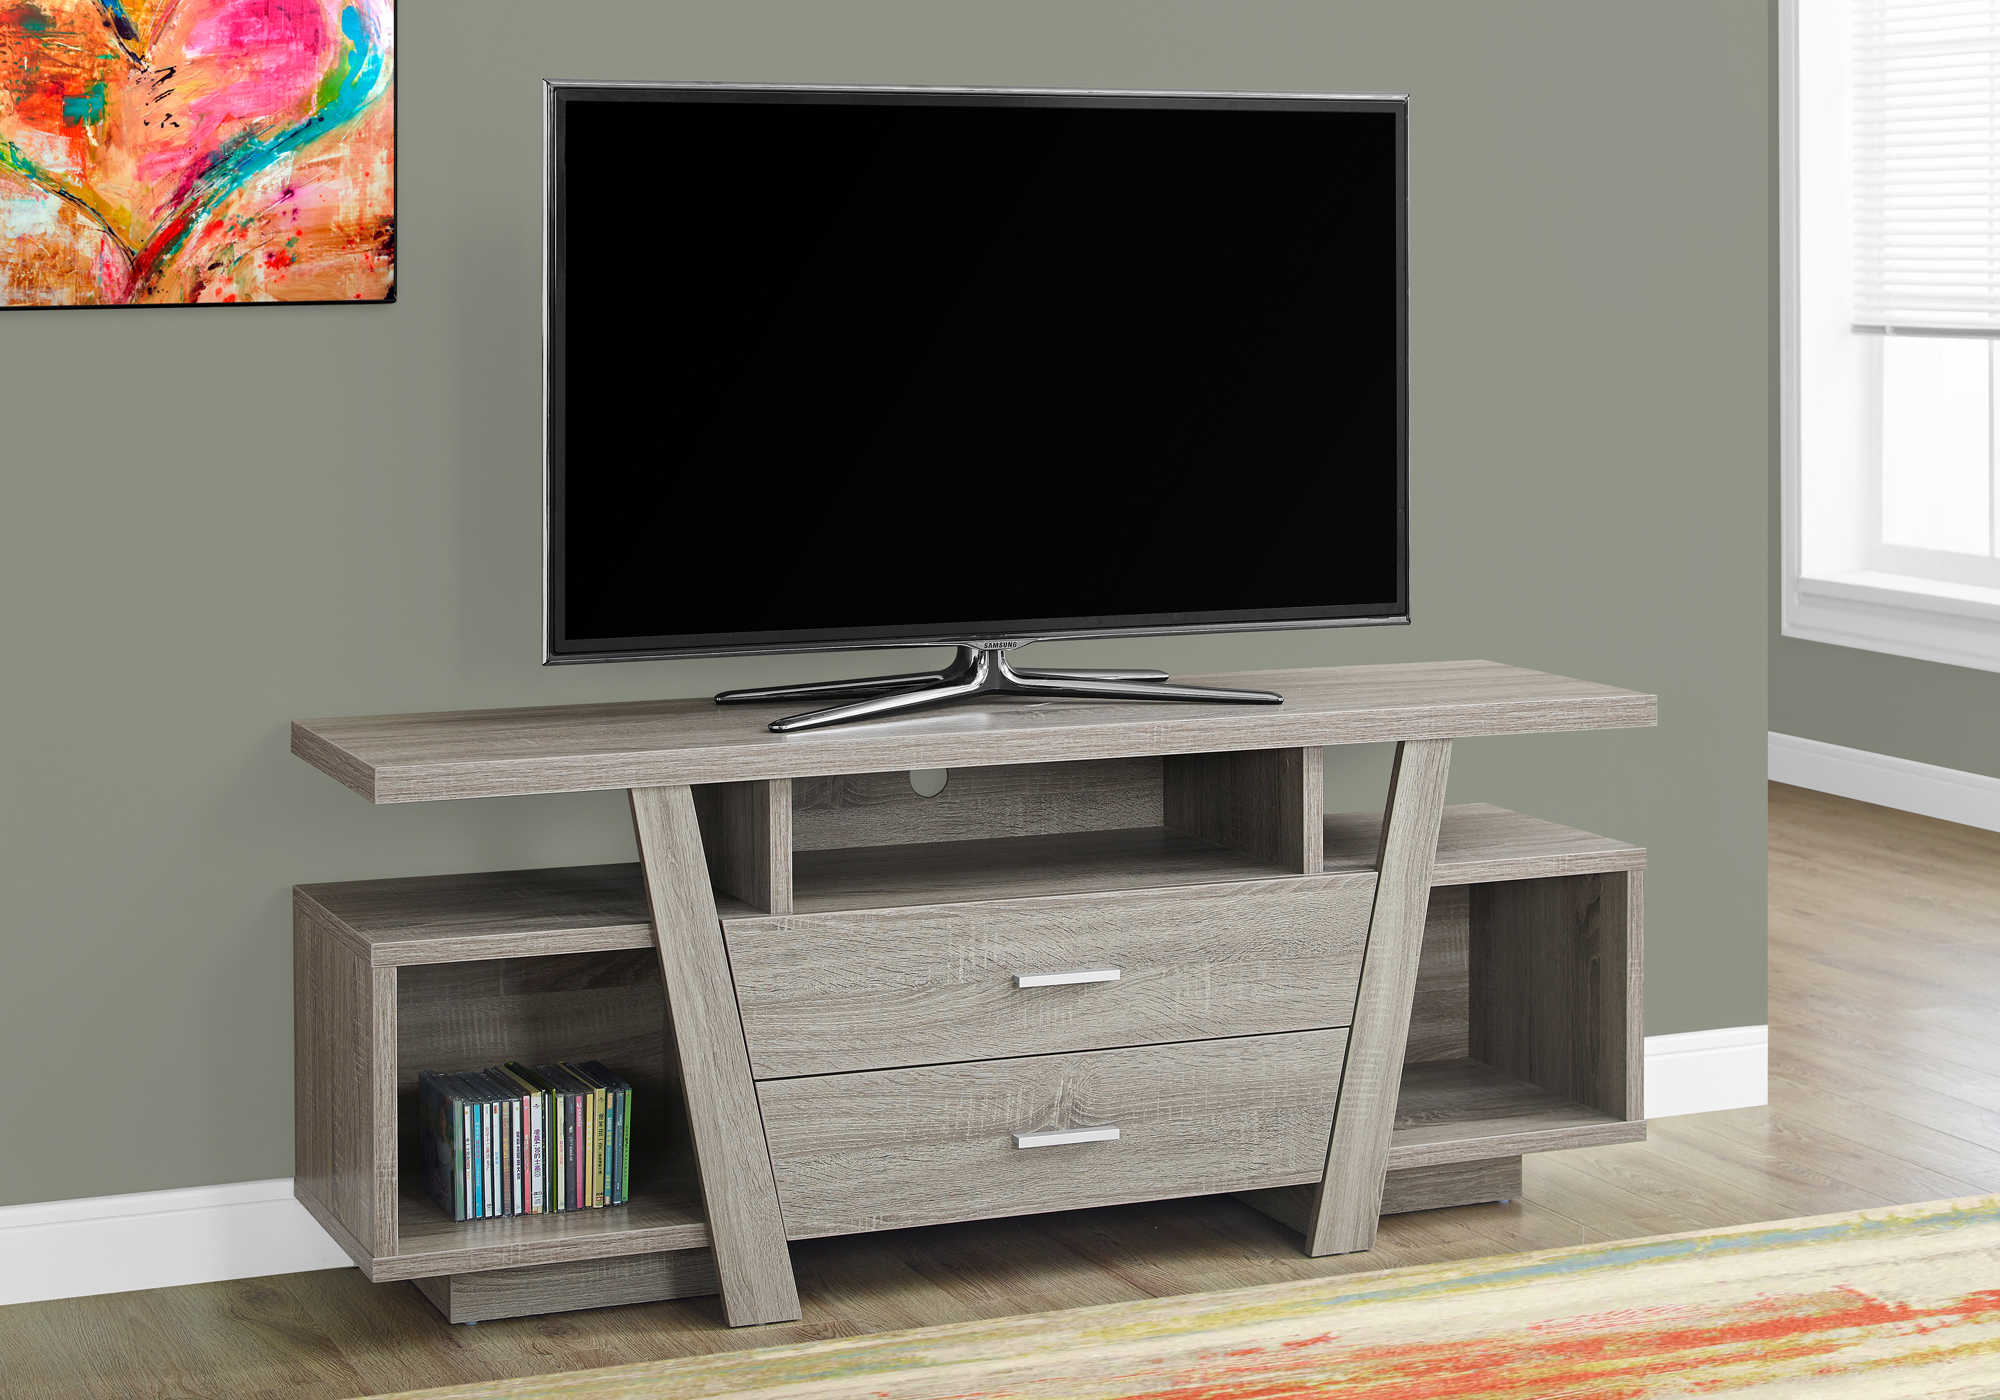 TV STAND - 60"L / DARK TAUPE WITH 2 STORAGE DRAWERS